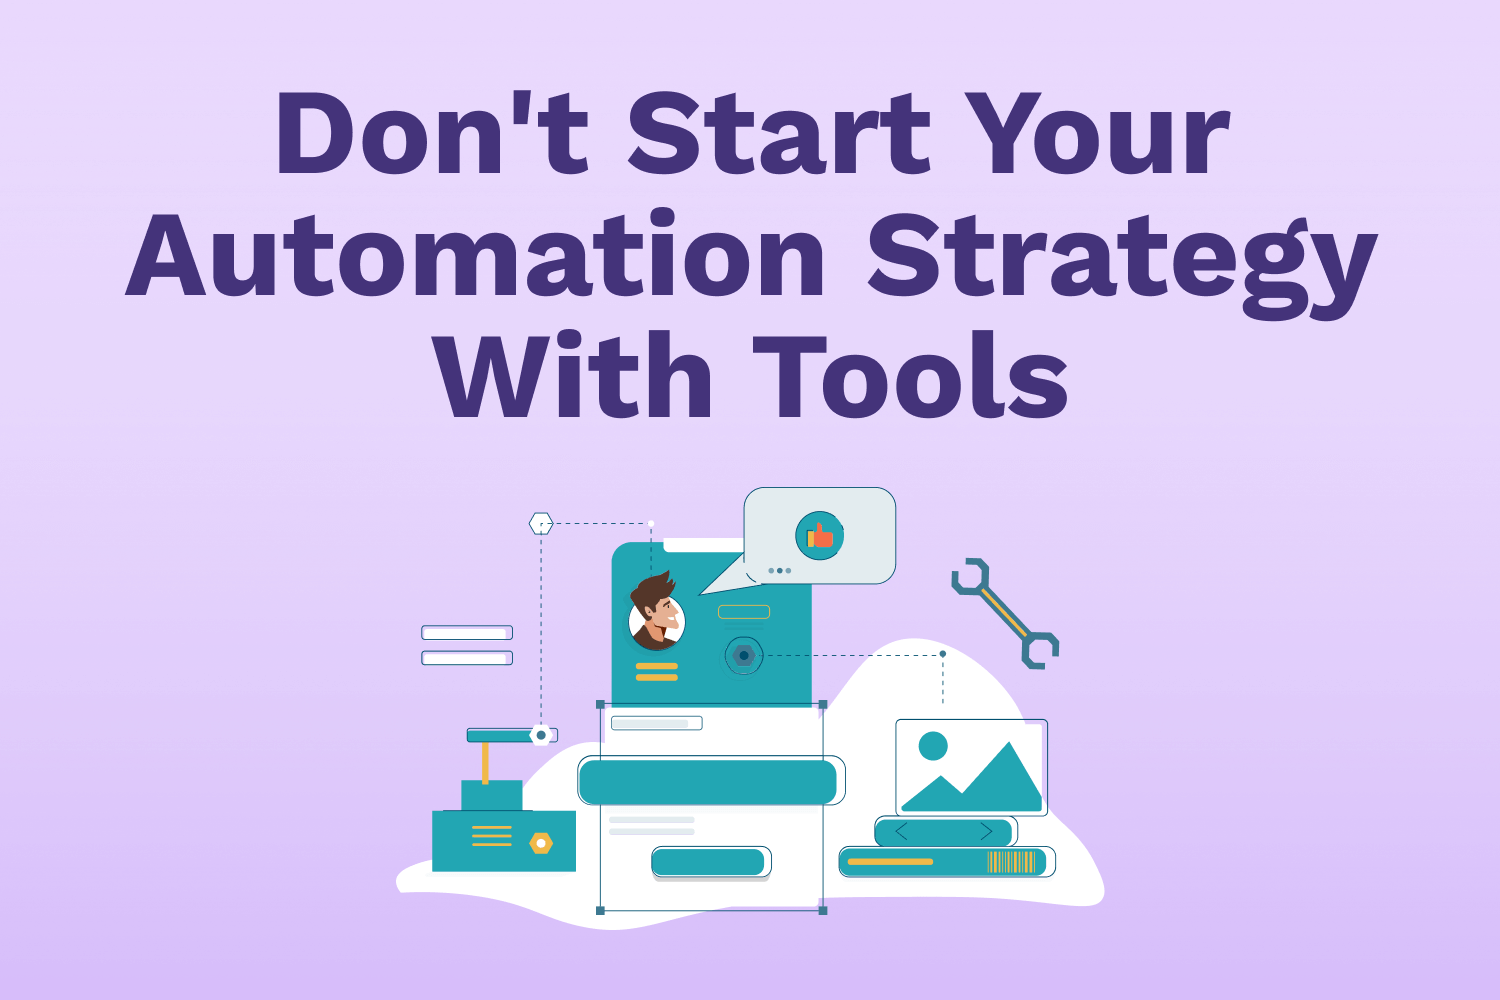 Don't Start Your Automation Strategy With Tools